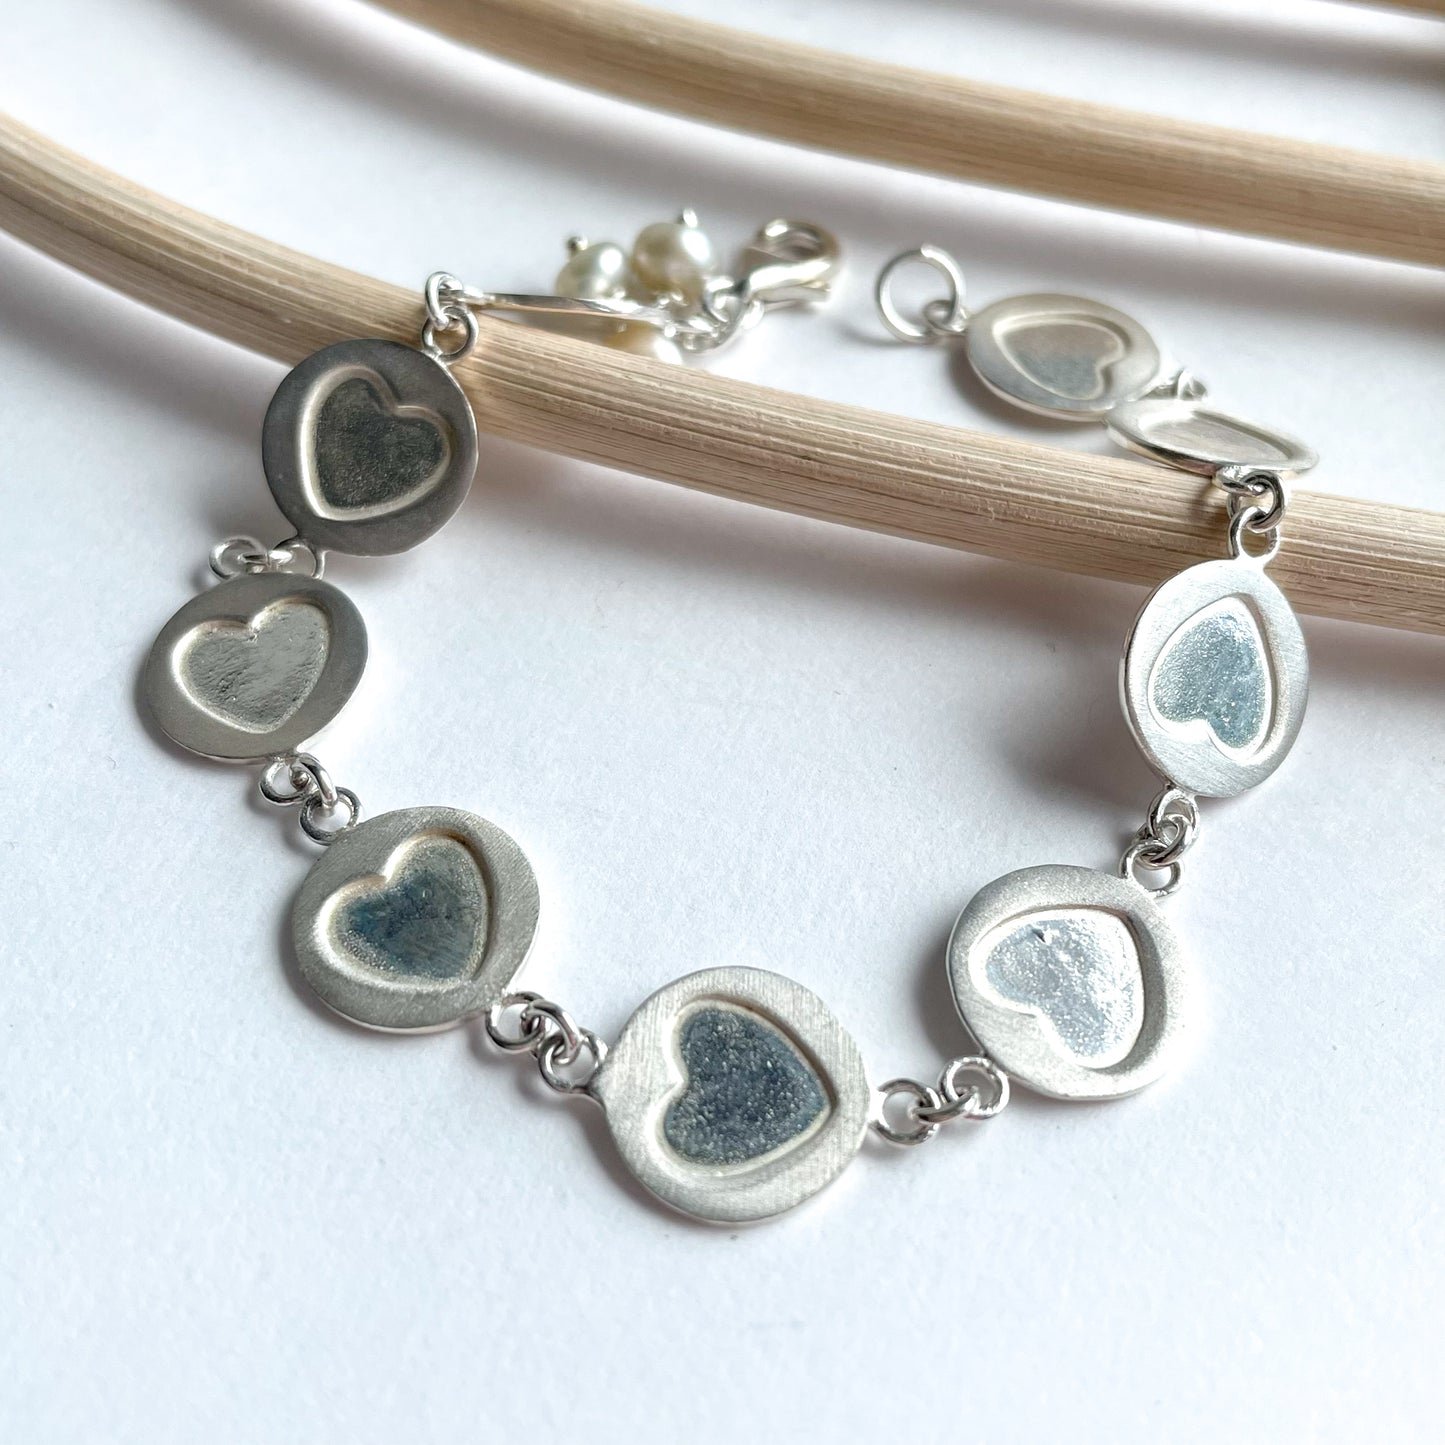 Heart Disk Bracelet and Pearls Charm - Solid Sterling Silver